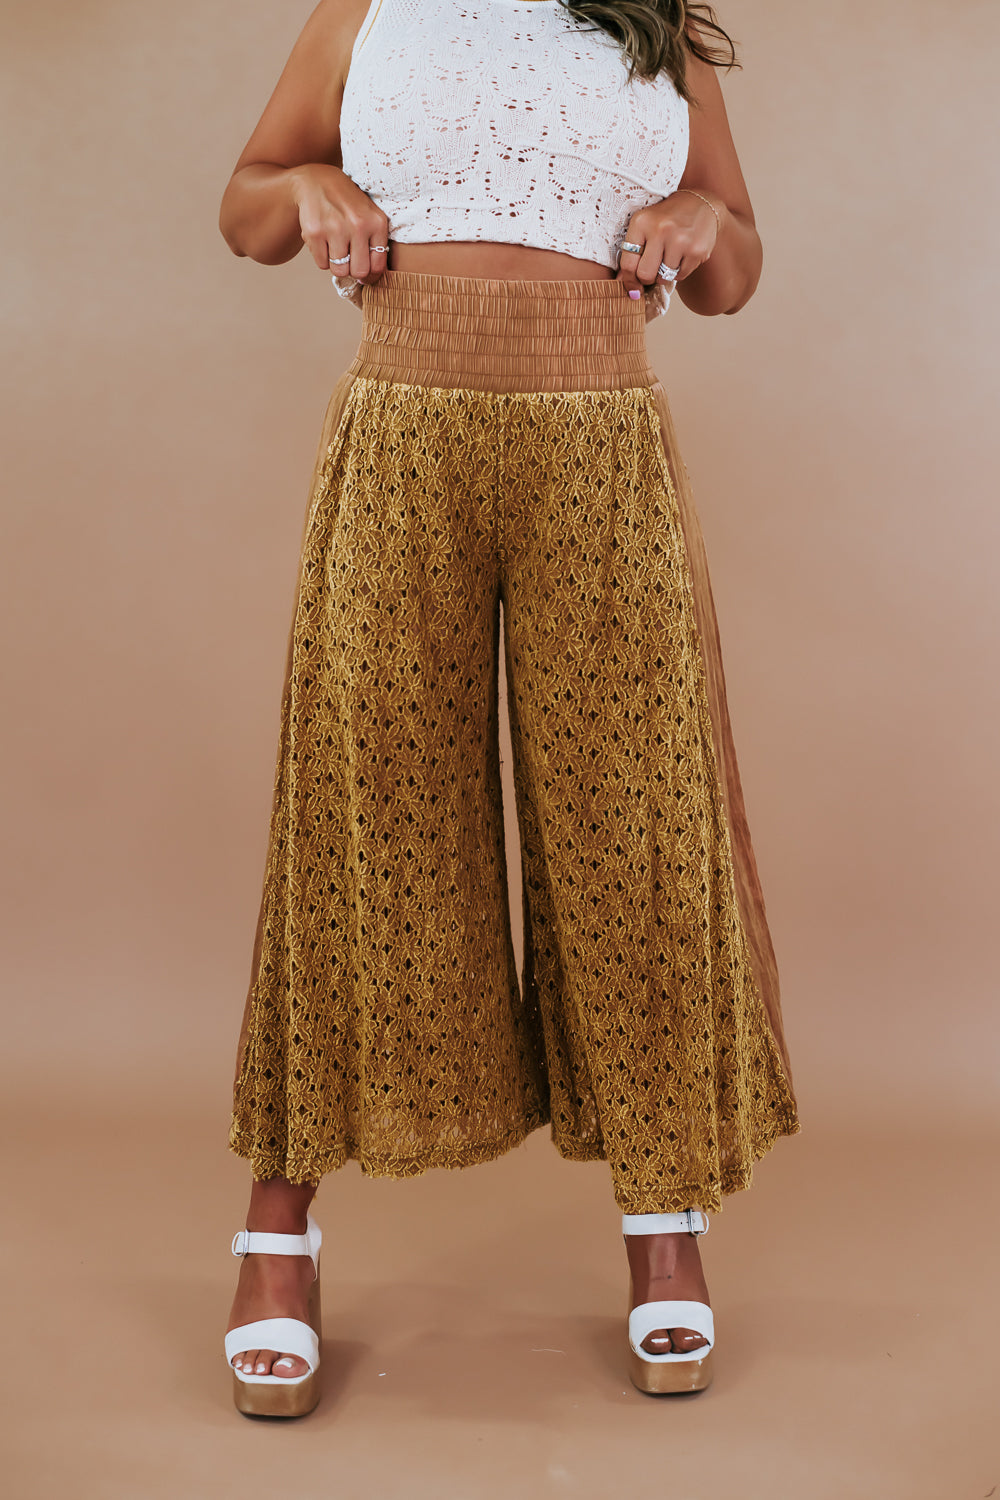 Mineral Washed Lace Wide Pants, Mustard